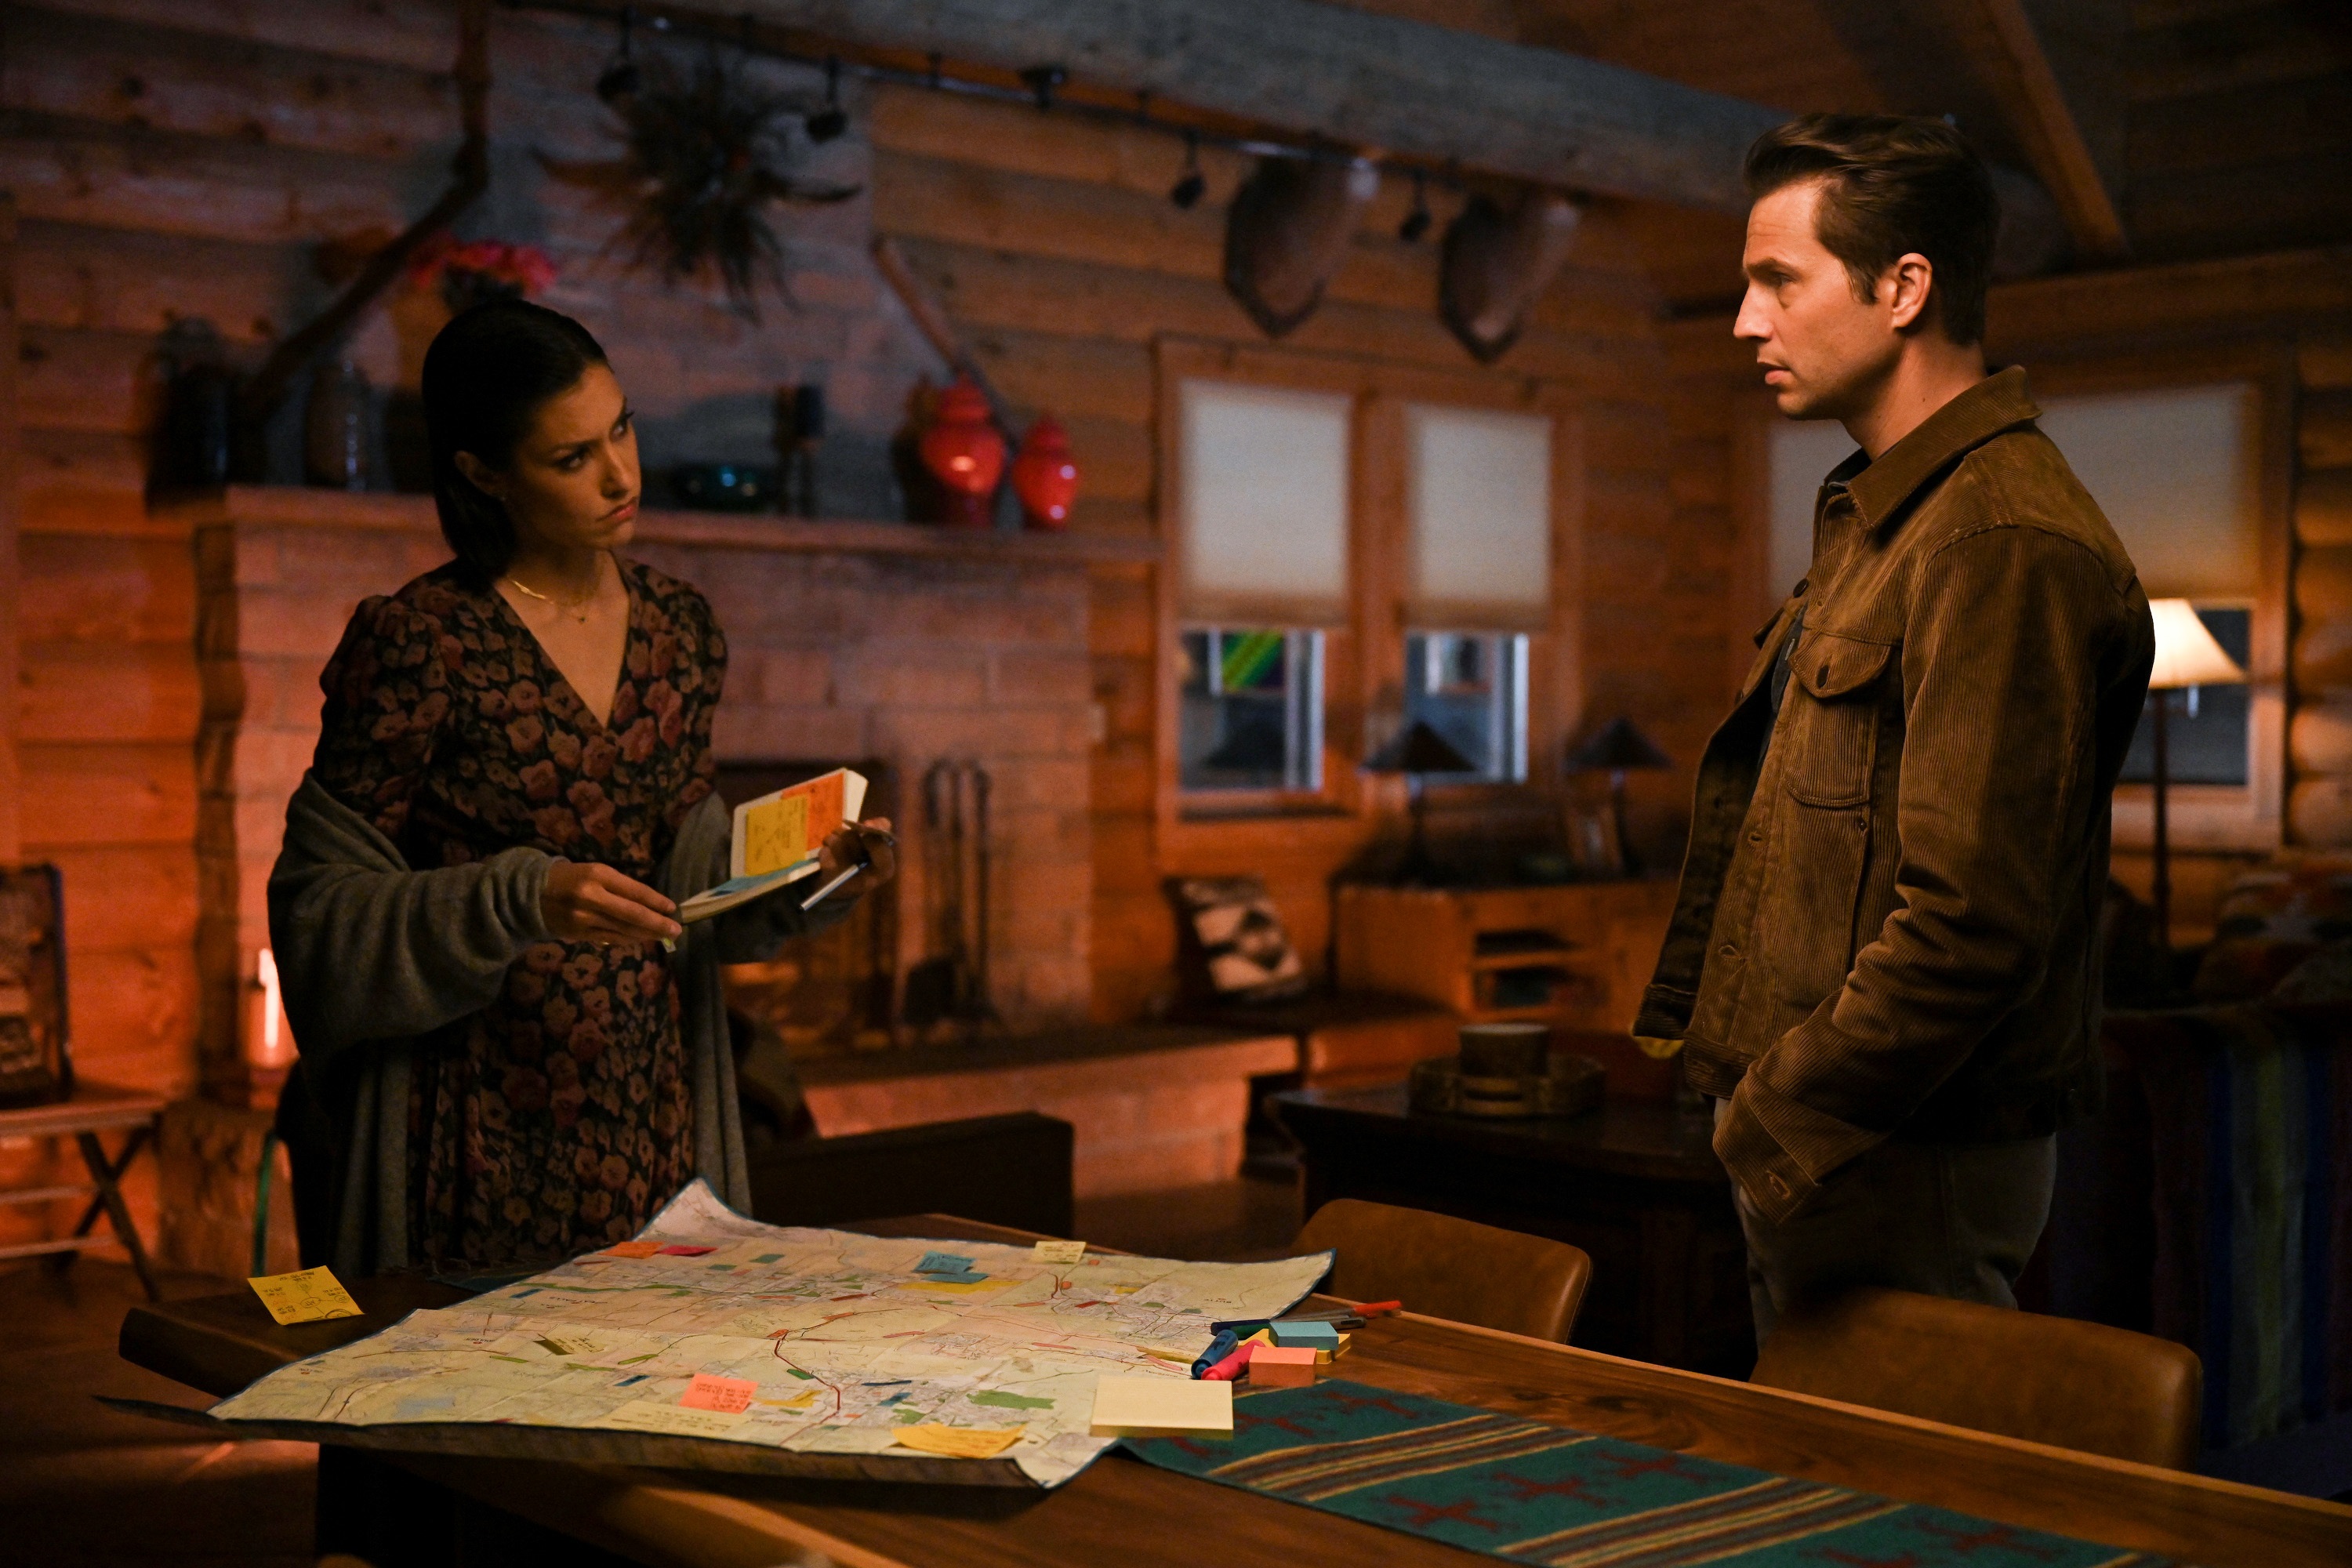 'Big Sky' cast members Janina Gavankar as Ren and Logan Marshall-Green as Travis looking at each other over a map